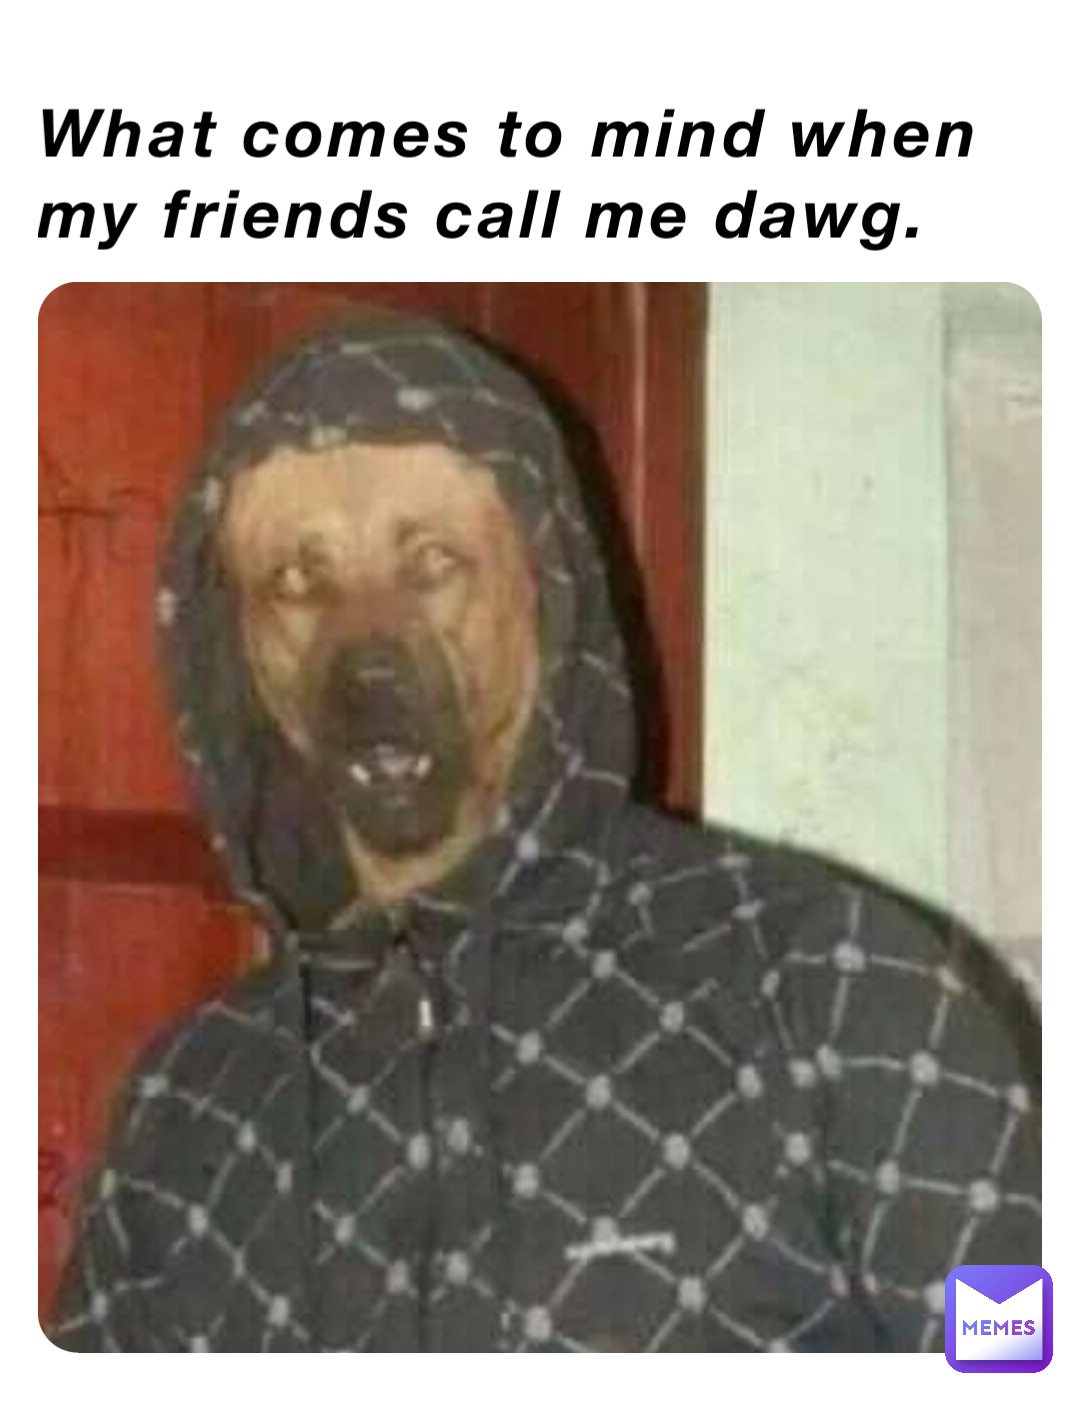 What comes to mind when my friends call me dawg.